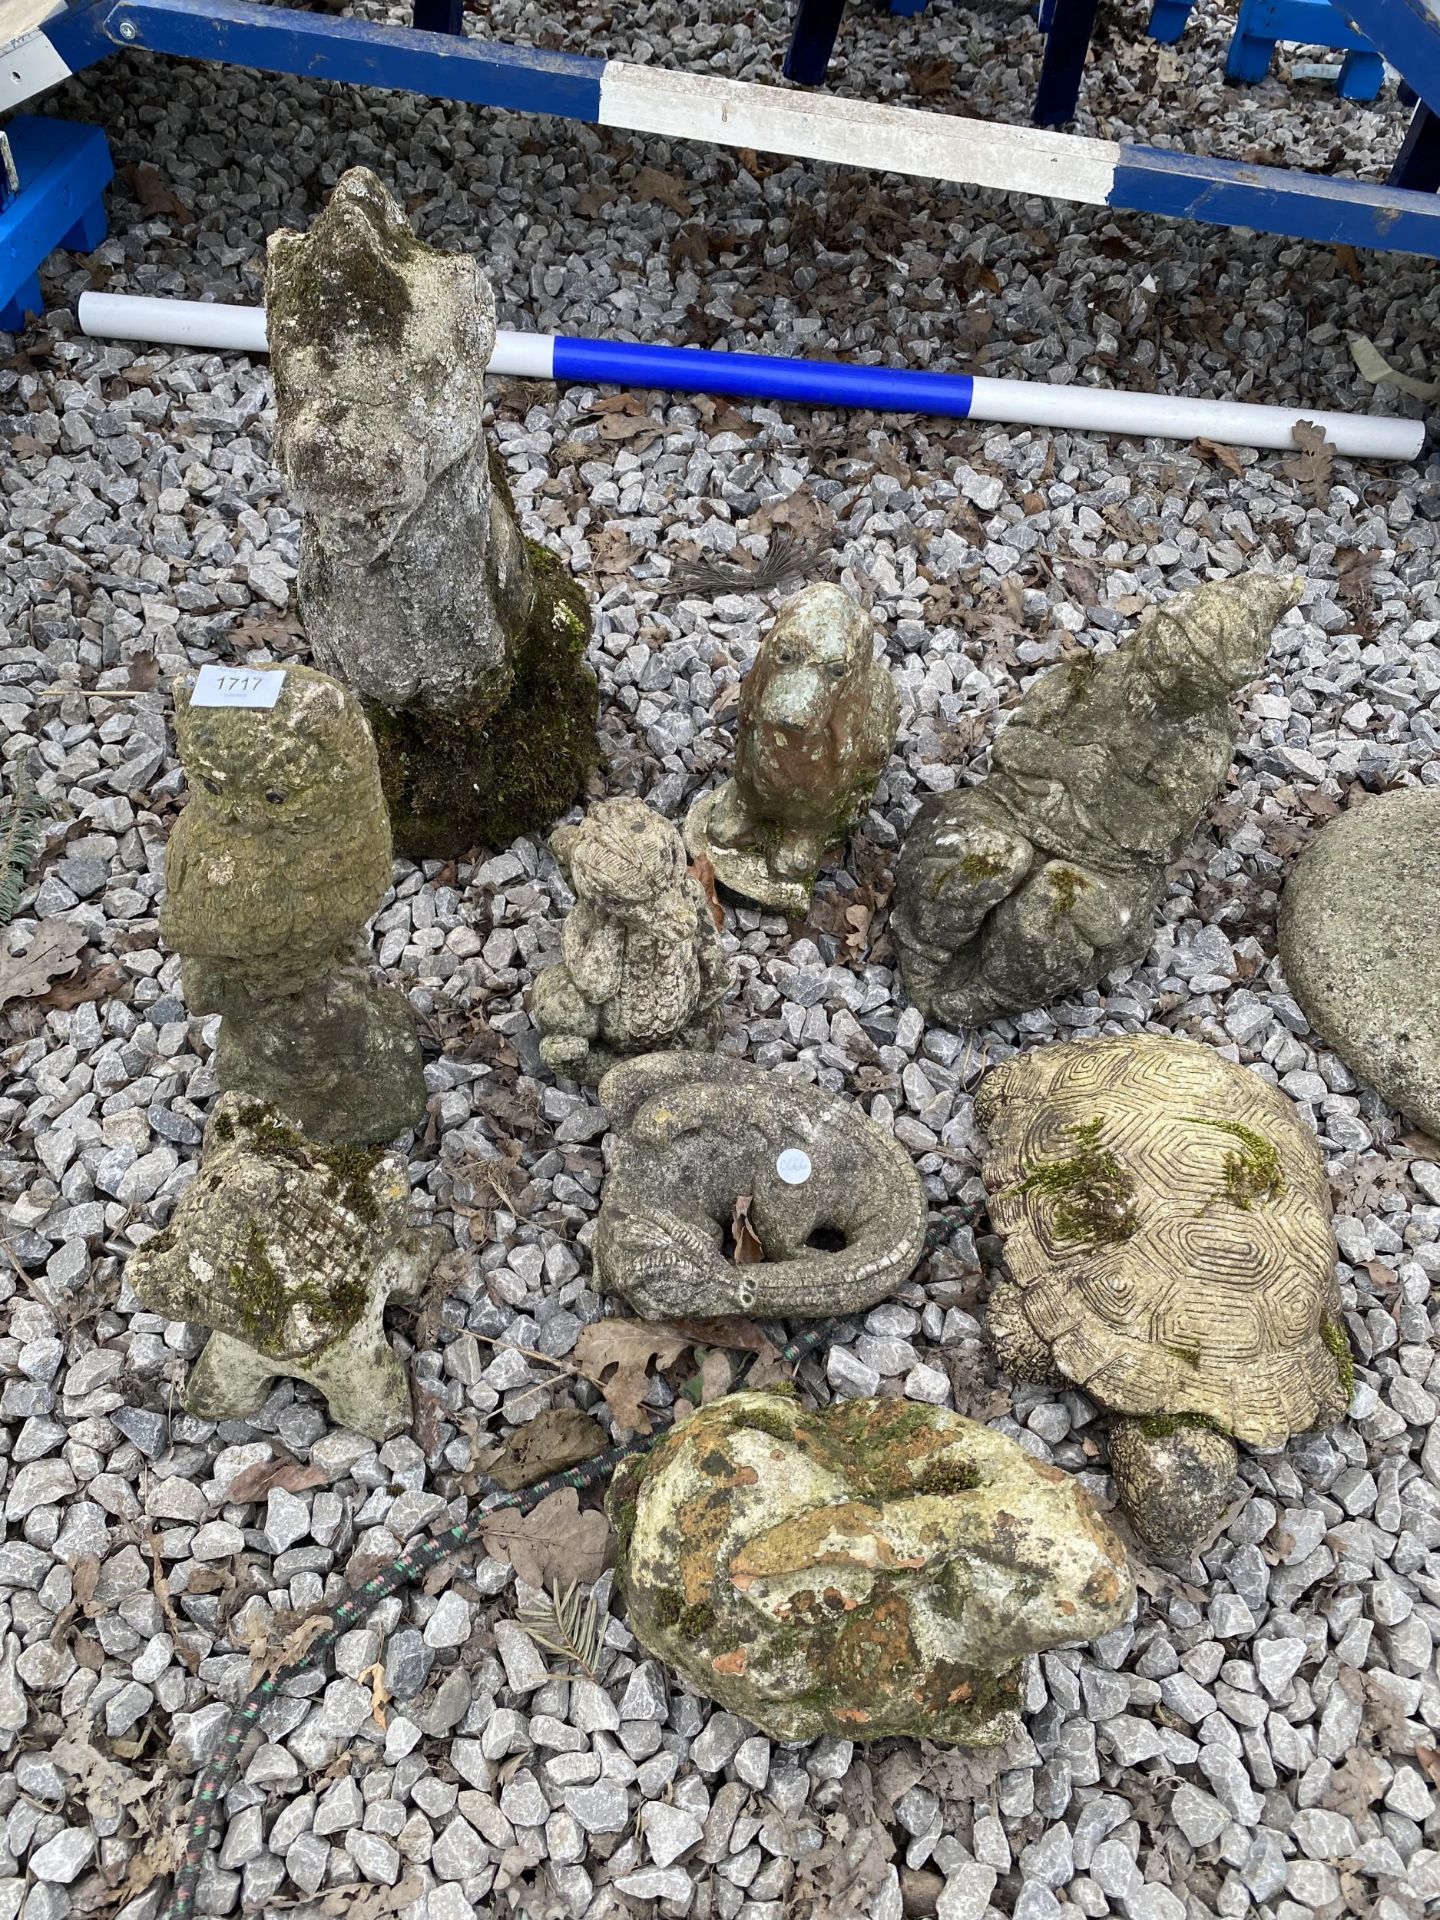 AN ASSORTMENT OF RECONSITUTED STONE GARDEN FIGURES TO INCLUDE A TURTLE, AN OWL AND A DOG ETC